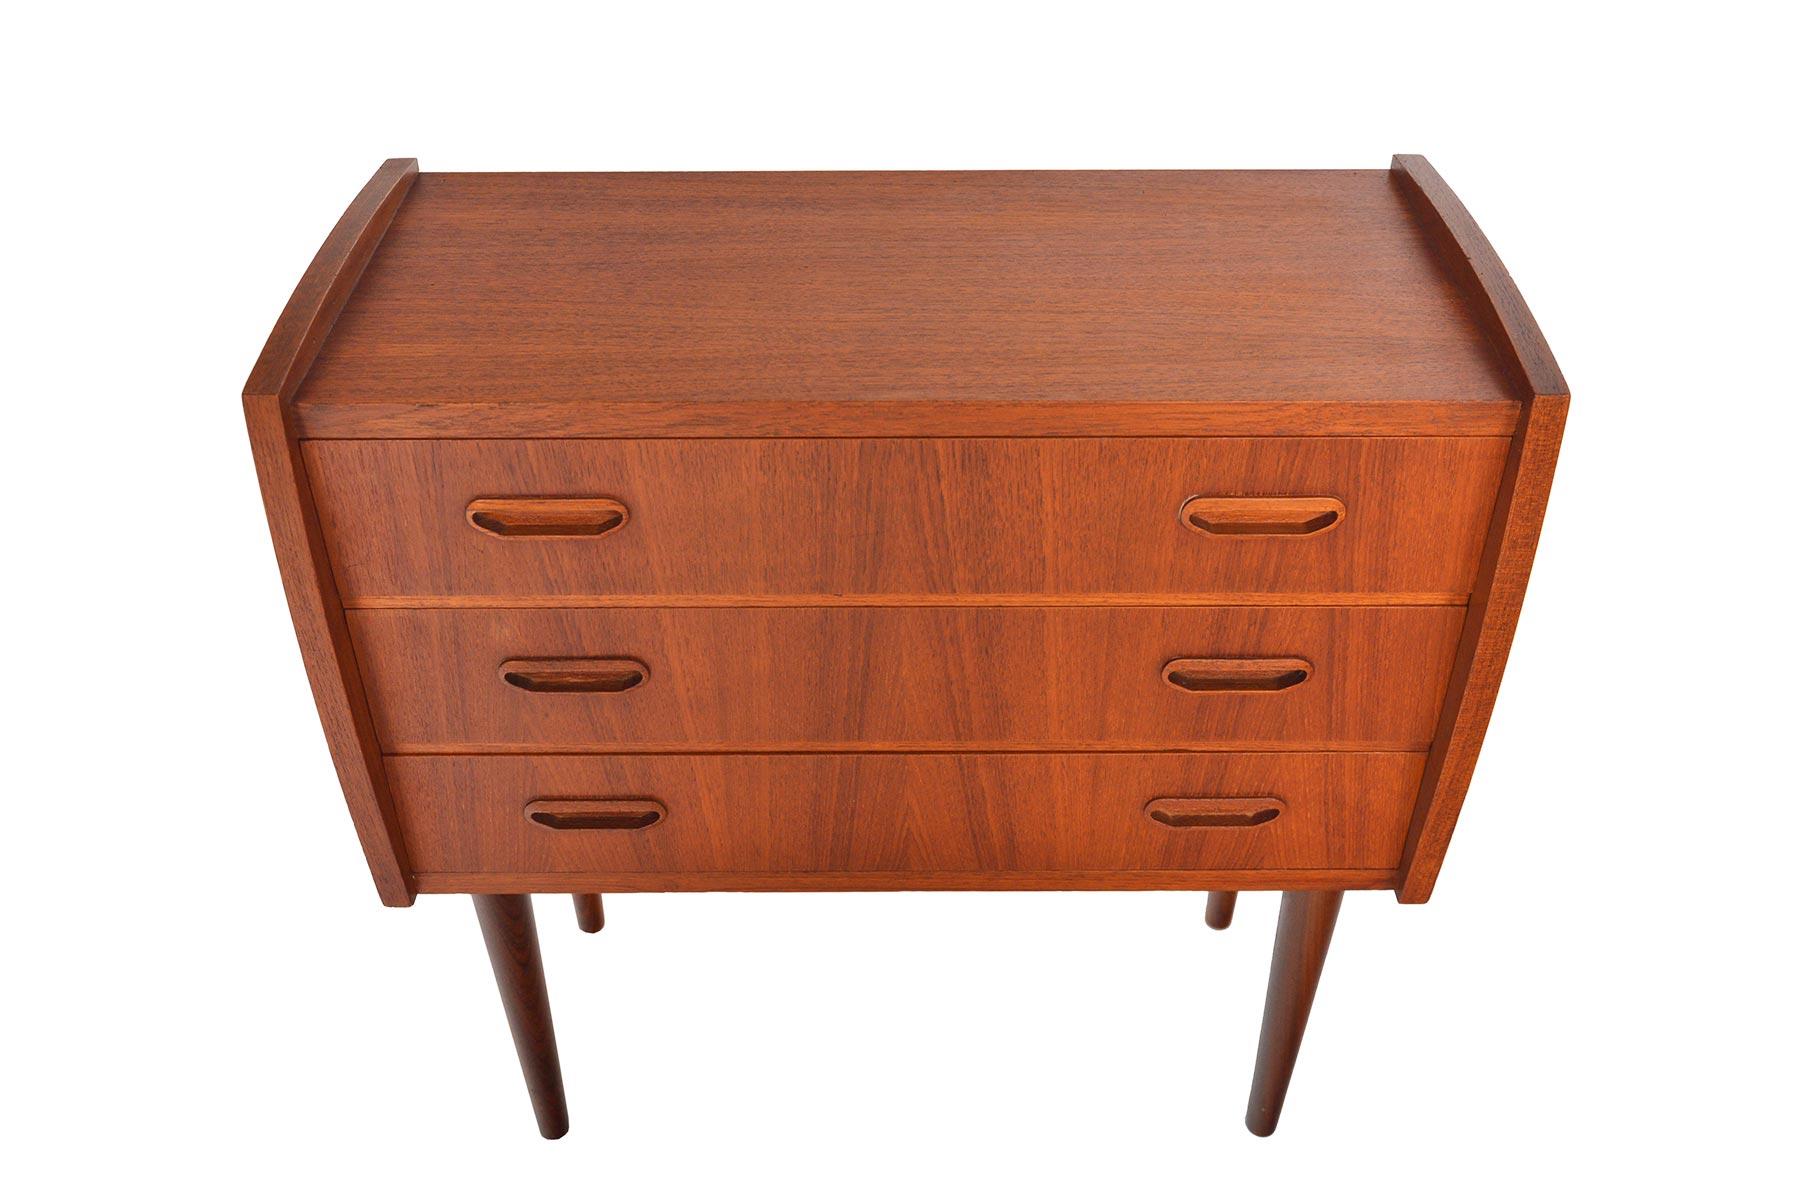 This Danish modern tall bow edge midcentury teak nightstand will make a wonderful addition to any modern home. Three well sized drawers are complimented by carved, trapezoidal drawer pulls. In excellent original condition.

 